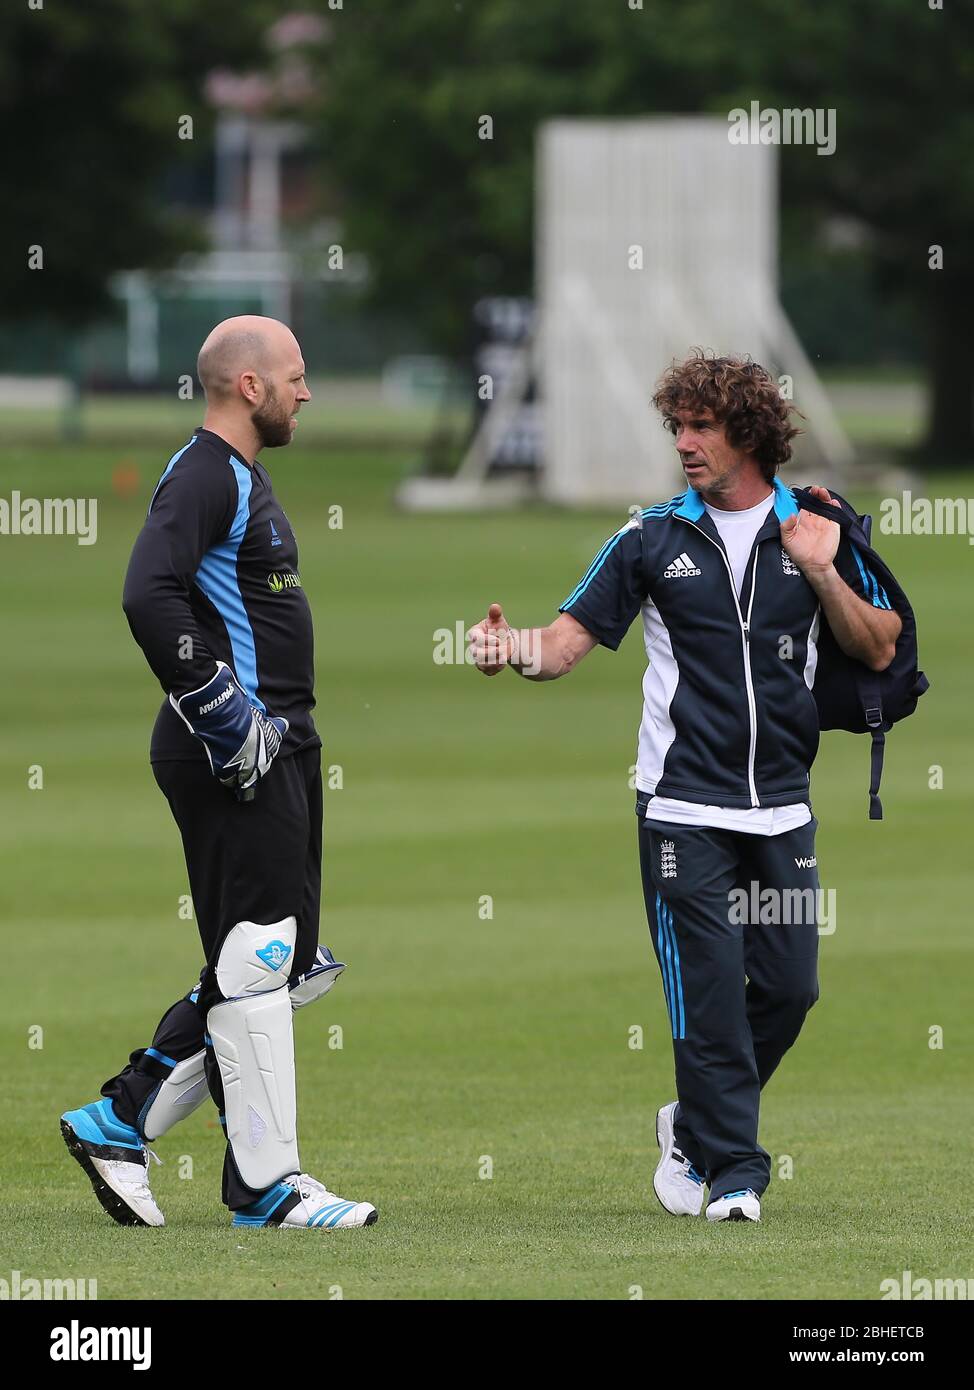 Matt Prior trains with England's wicket keeping coach Bruce French coach at The Merchant Taylors' School in Northwood, Middlesex. May 29, 2014. James Boardman/ TELEPHOTO IMAGES Stock Photo